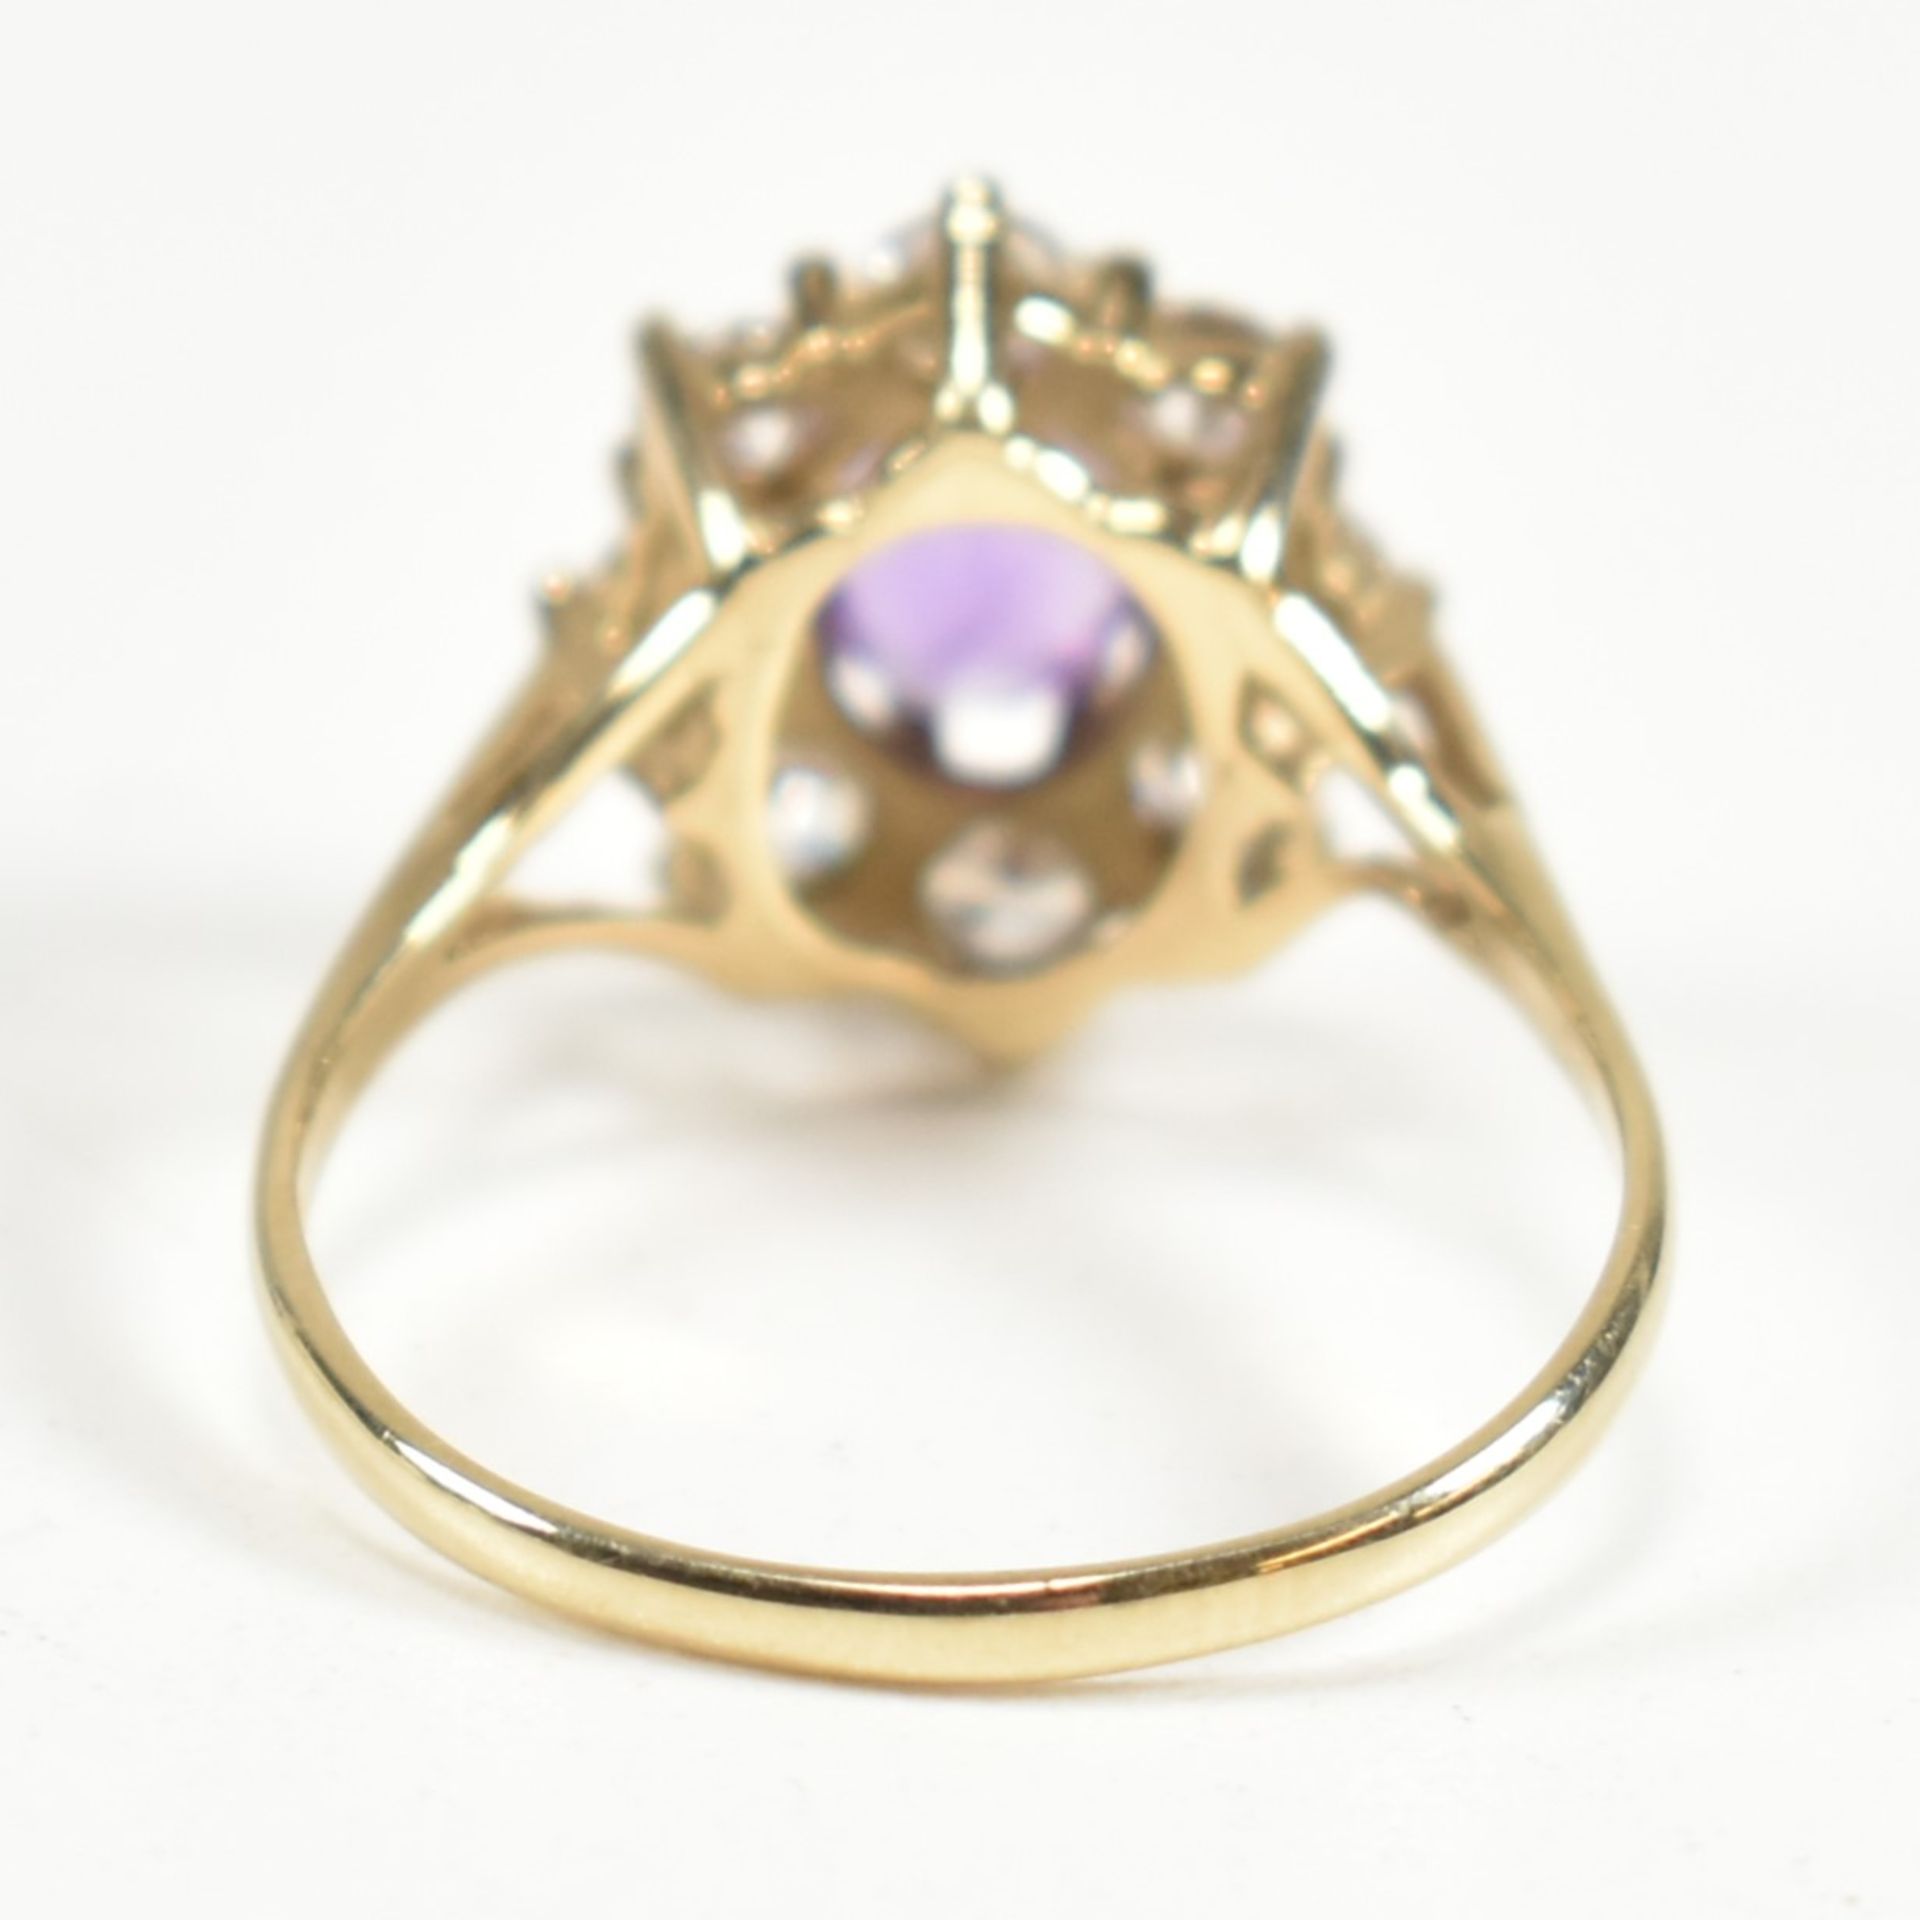 HALLMARKED 9CT GOLD AMETHYST & WHITE STONE CLUSTER RING - Image 2 of 9